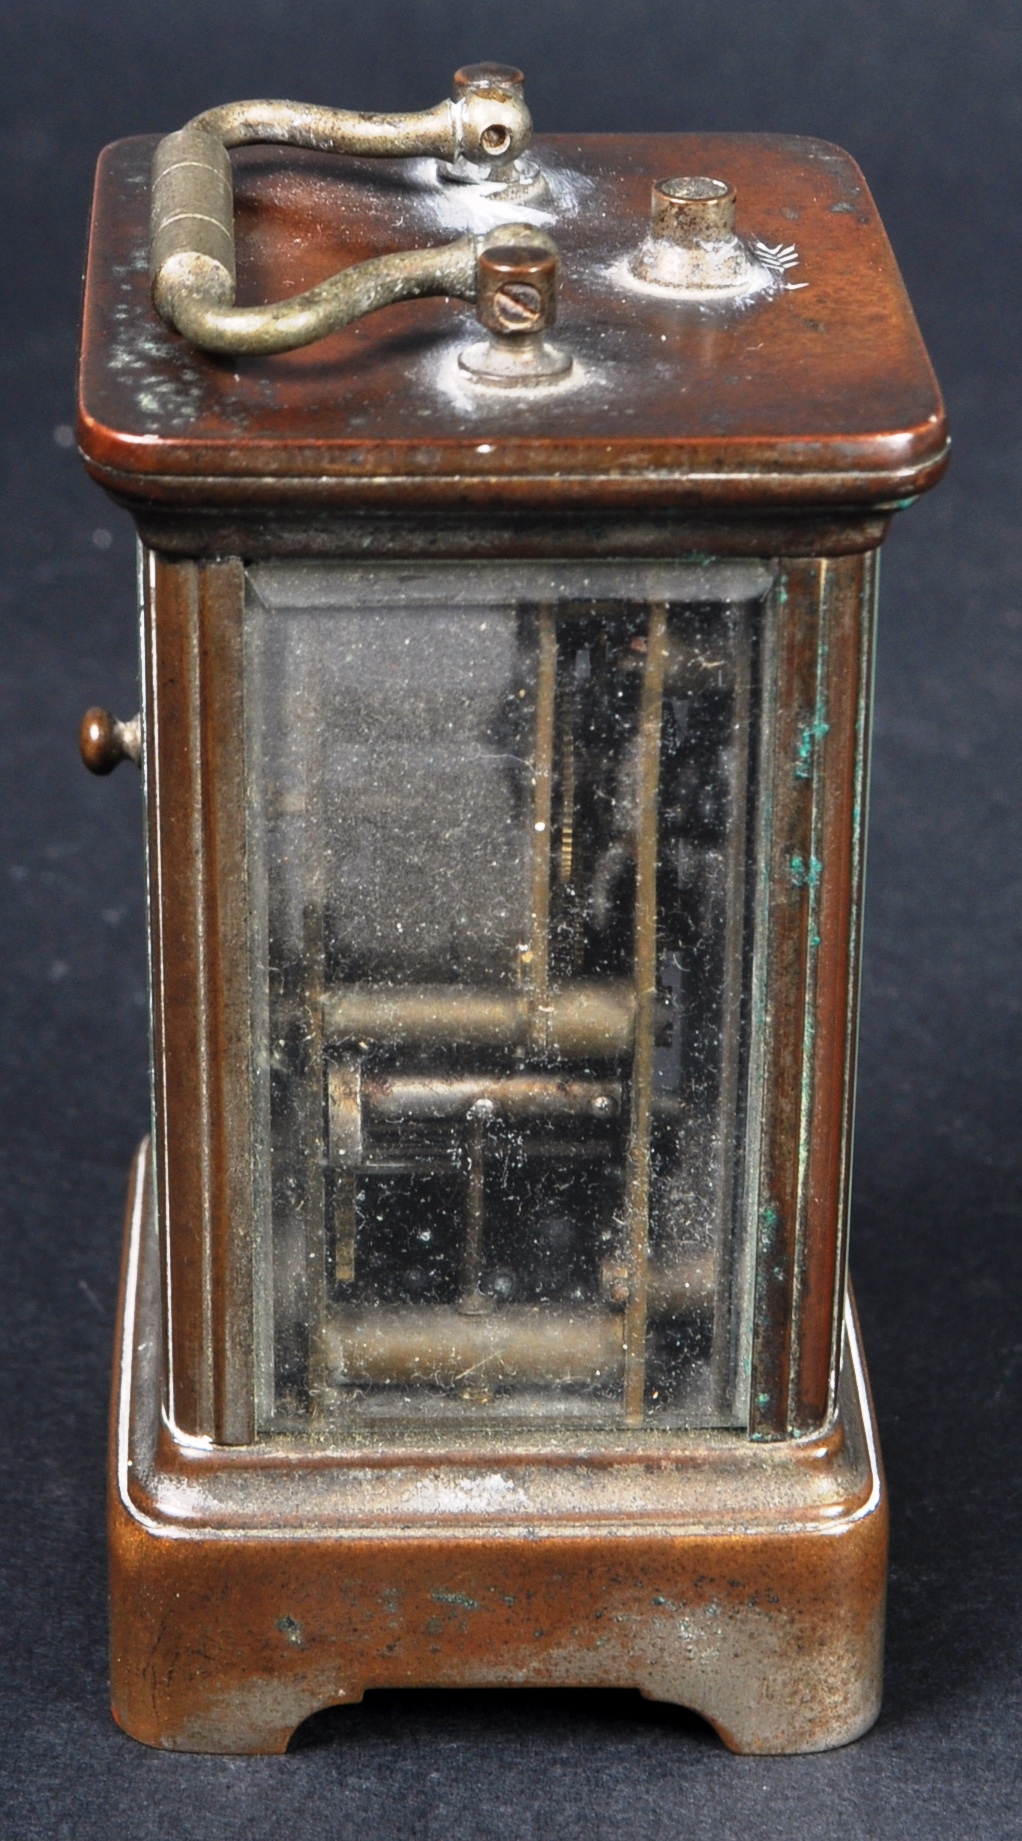 EARLY 20TH CENTURY MINIATURE CARRIAGE CLOCK - Image 5 of 6